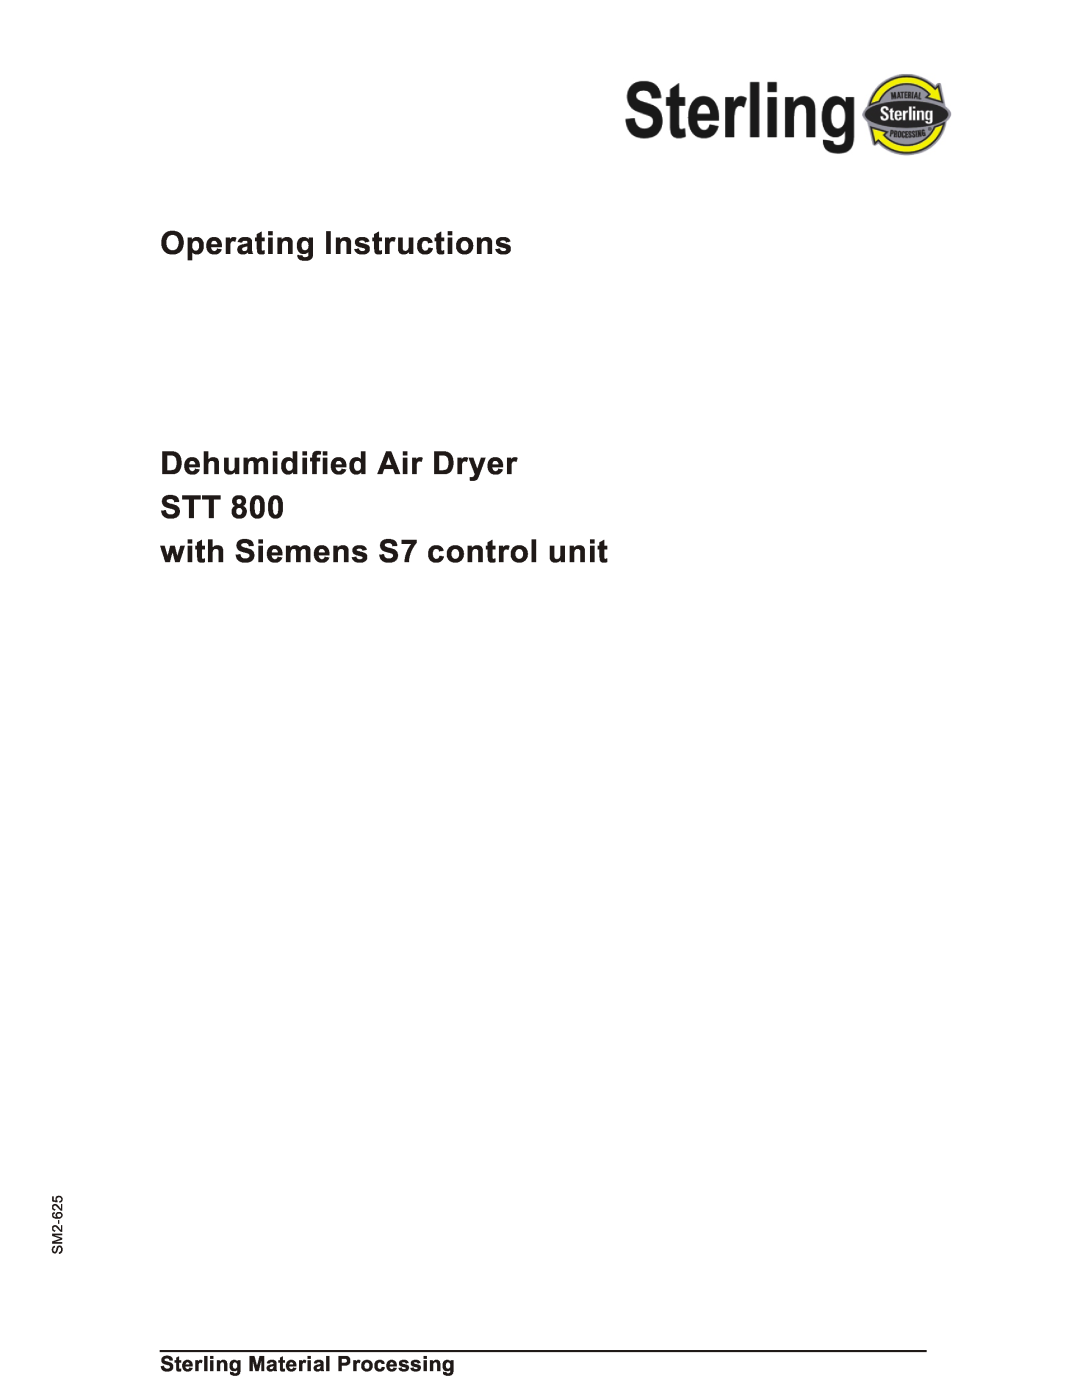 Sterling STT 800 manual Operating Instructions Dehumidified Air Dryer STT, with Siemens S7 control unit, SM2-625 